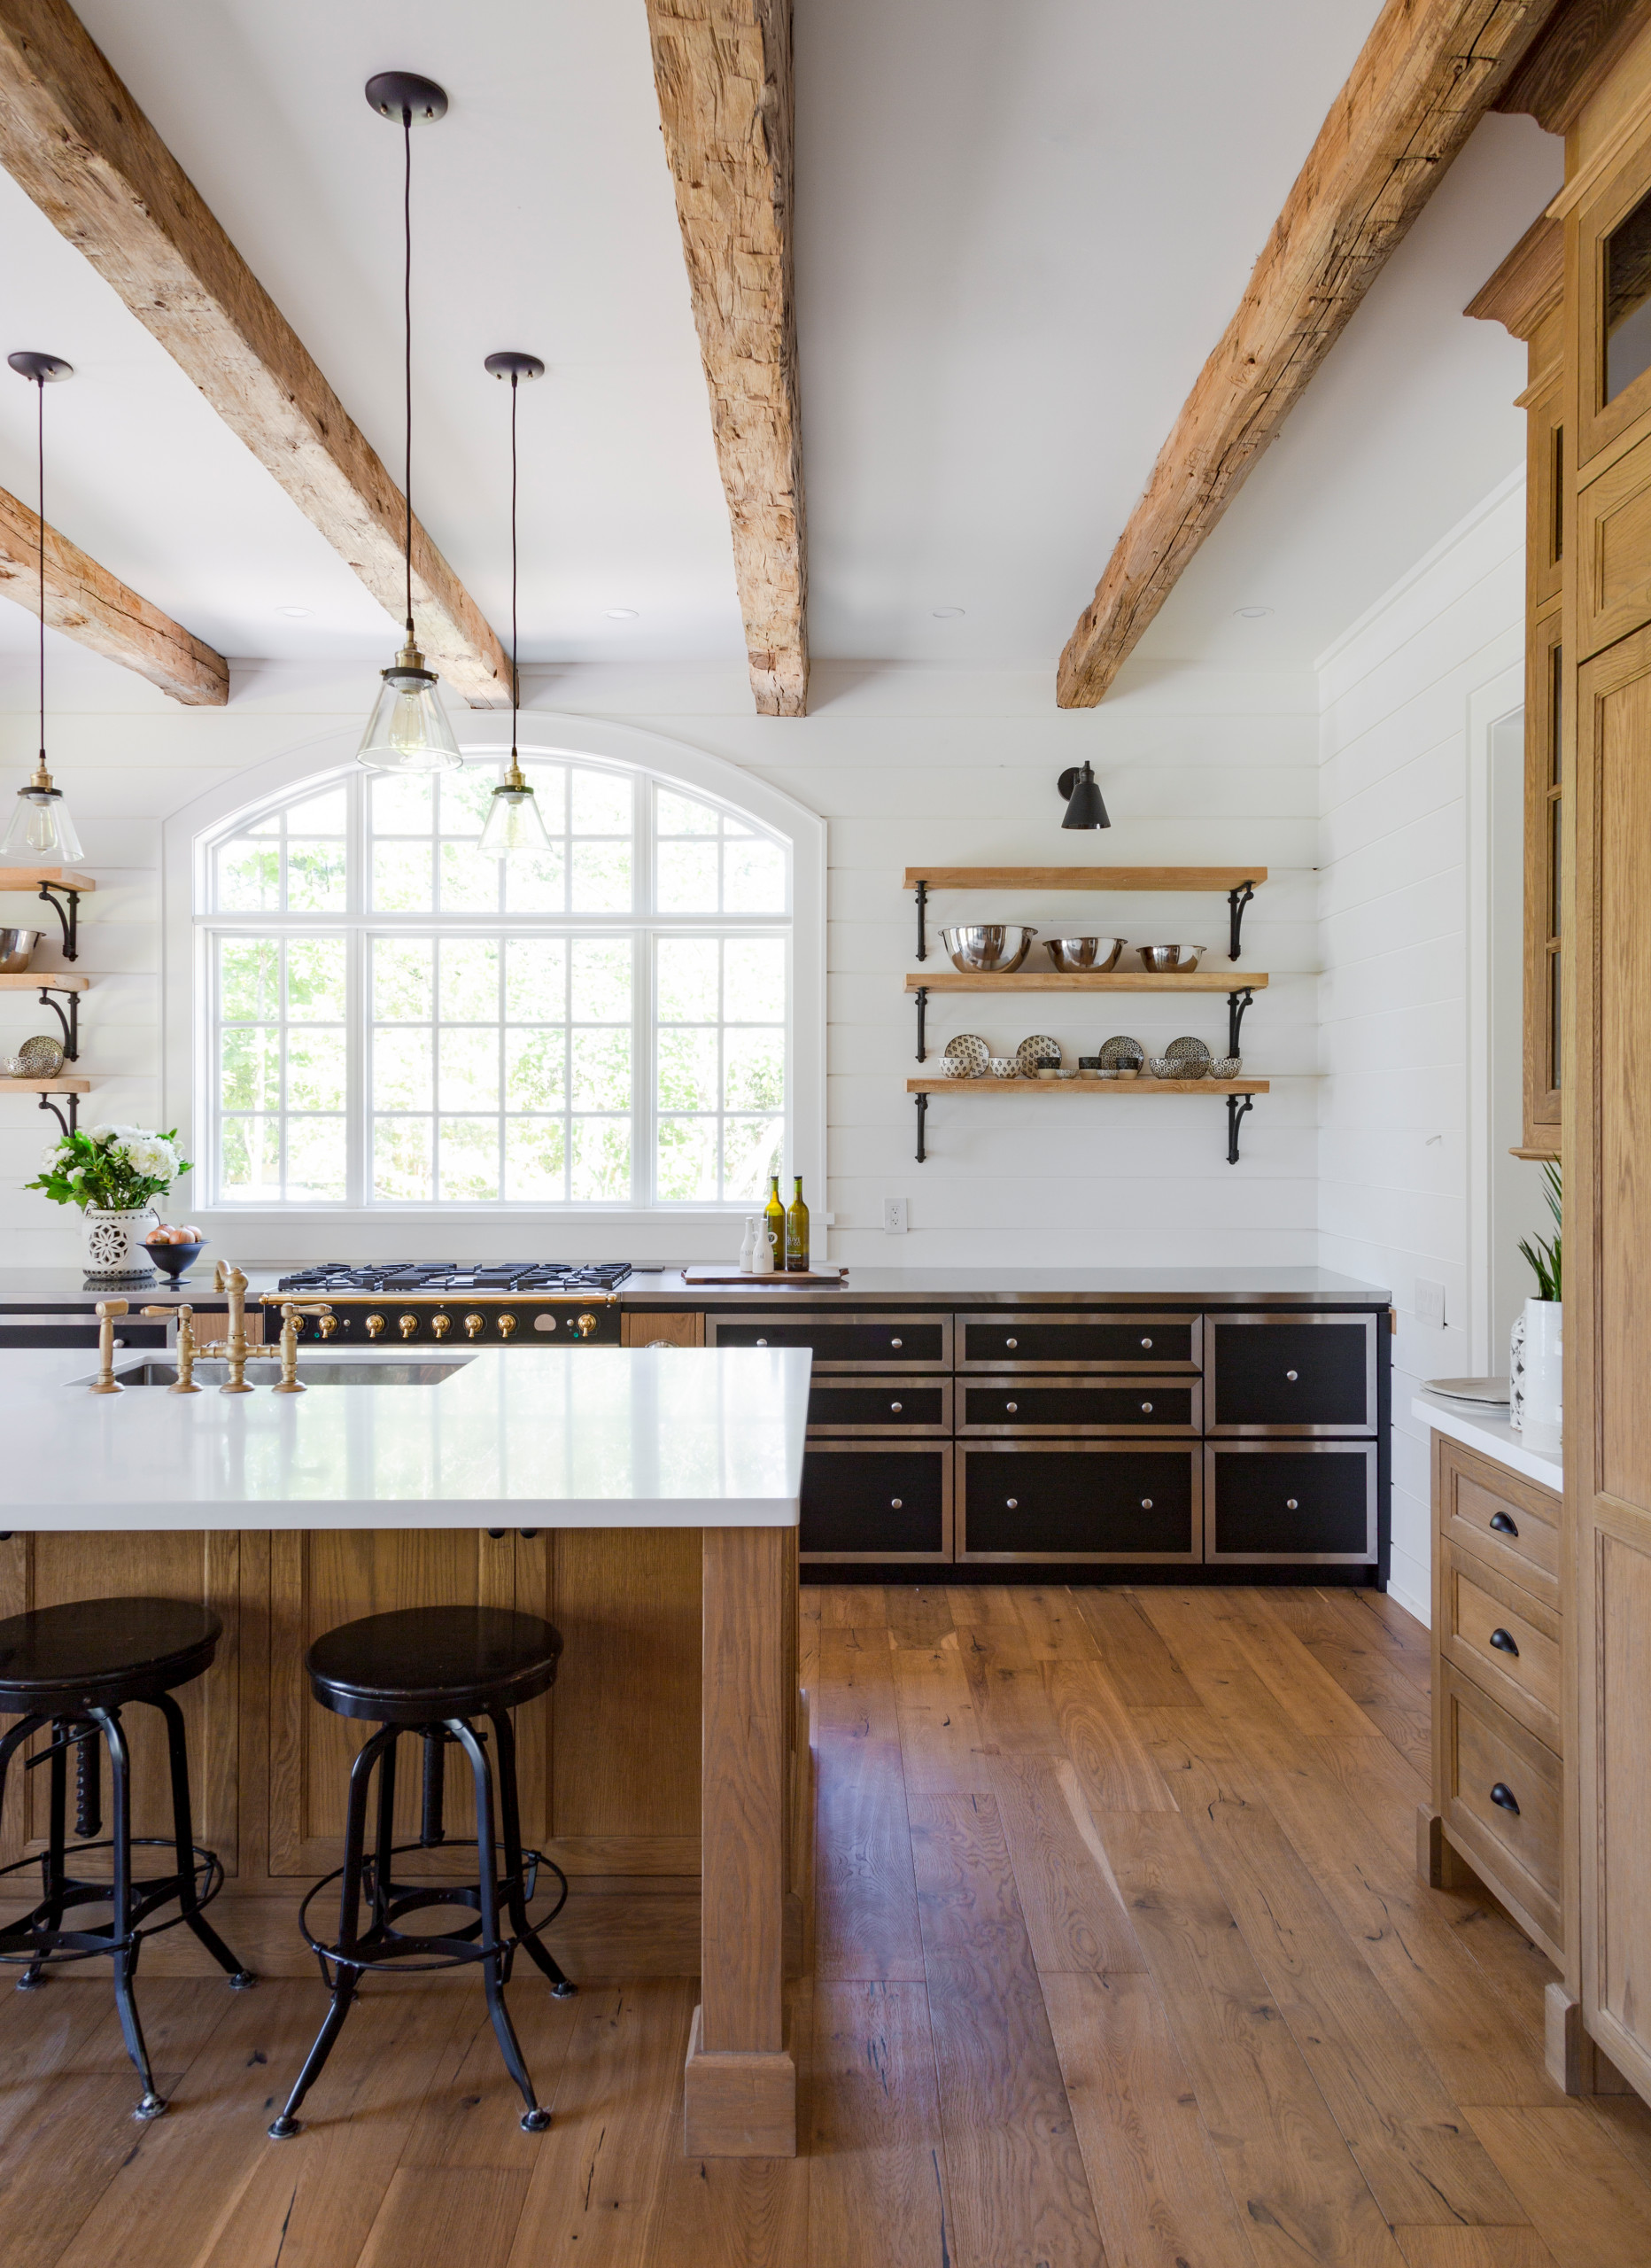 23 Farmhouse Kitchen Ideas to Add Rustic Charm in Modern Spaces